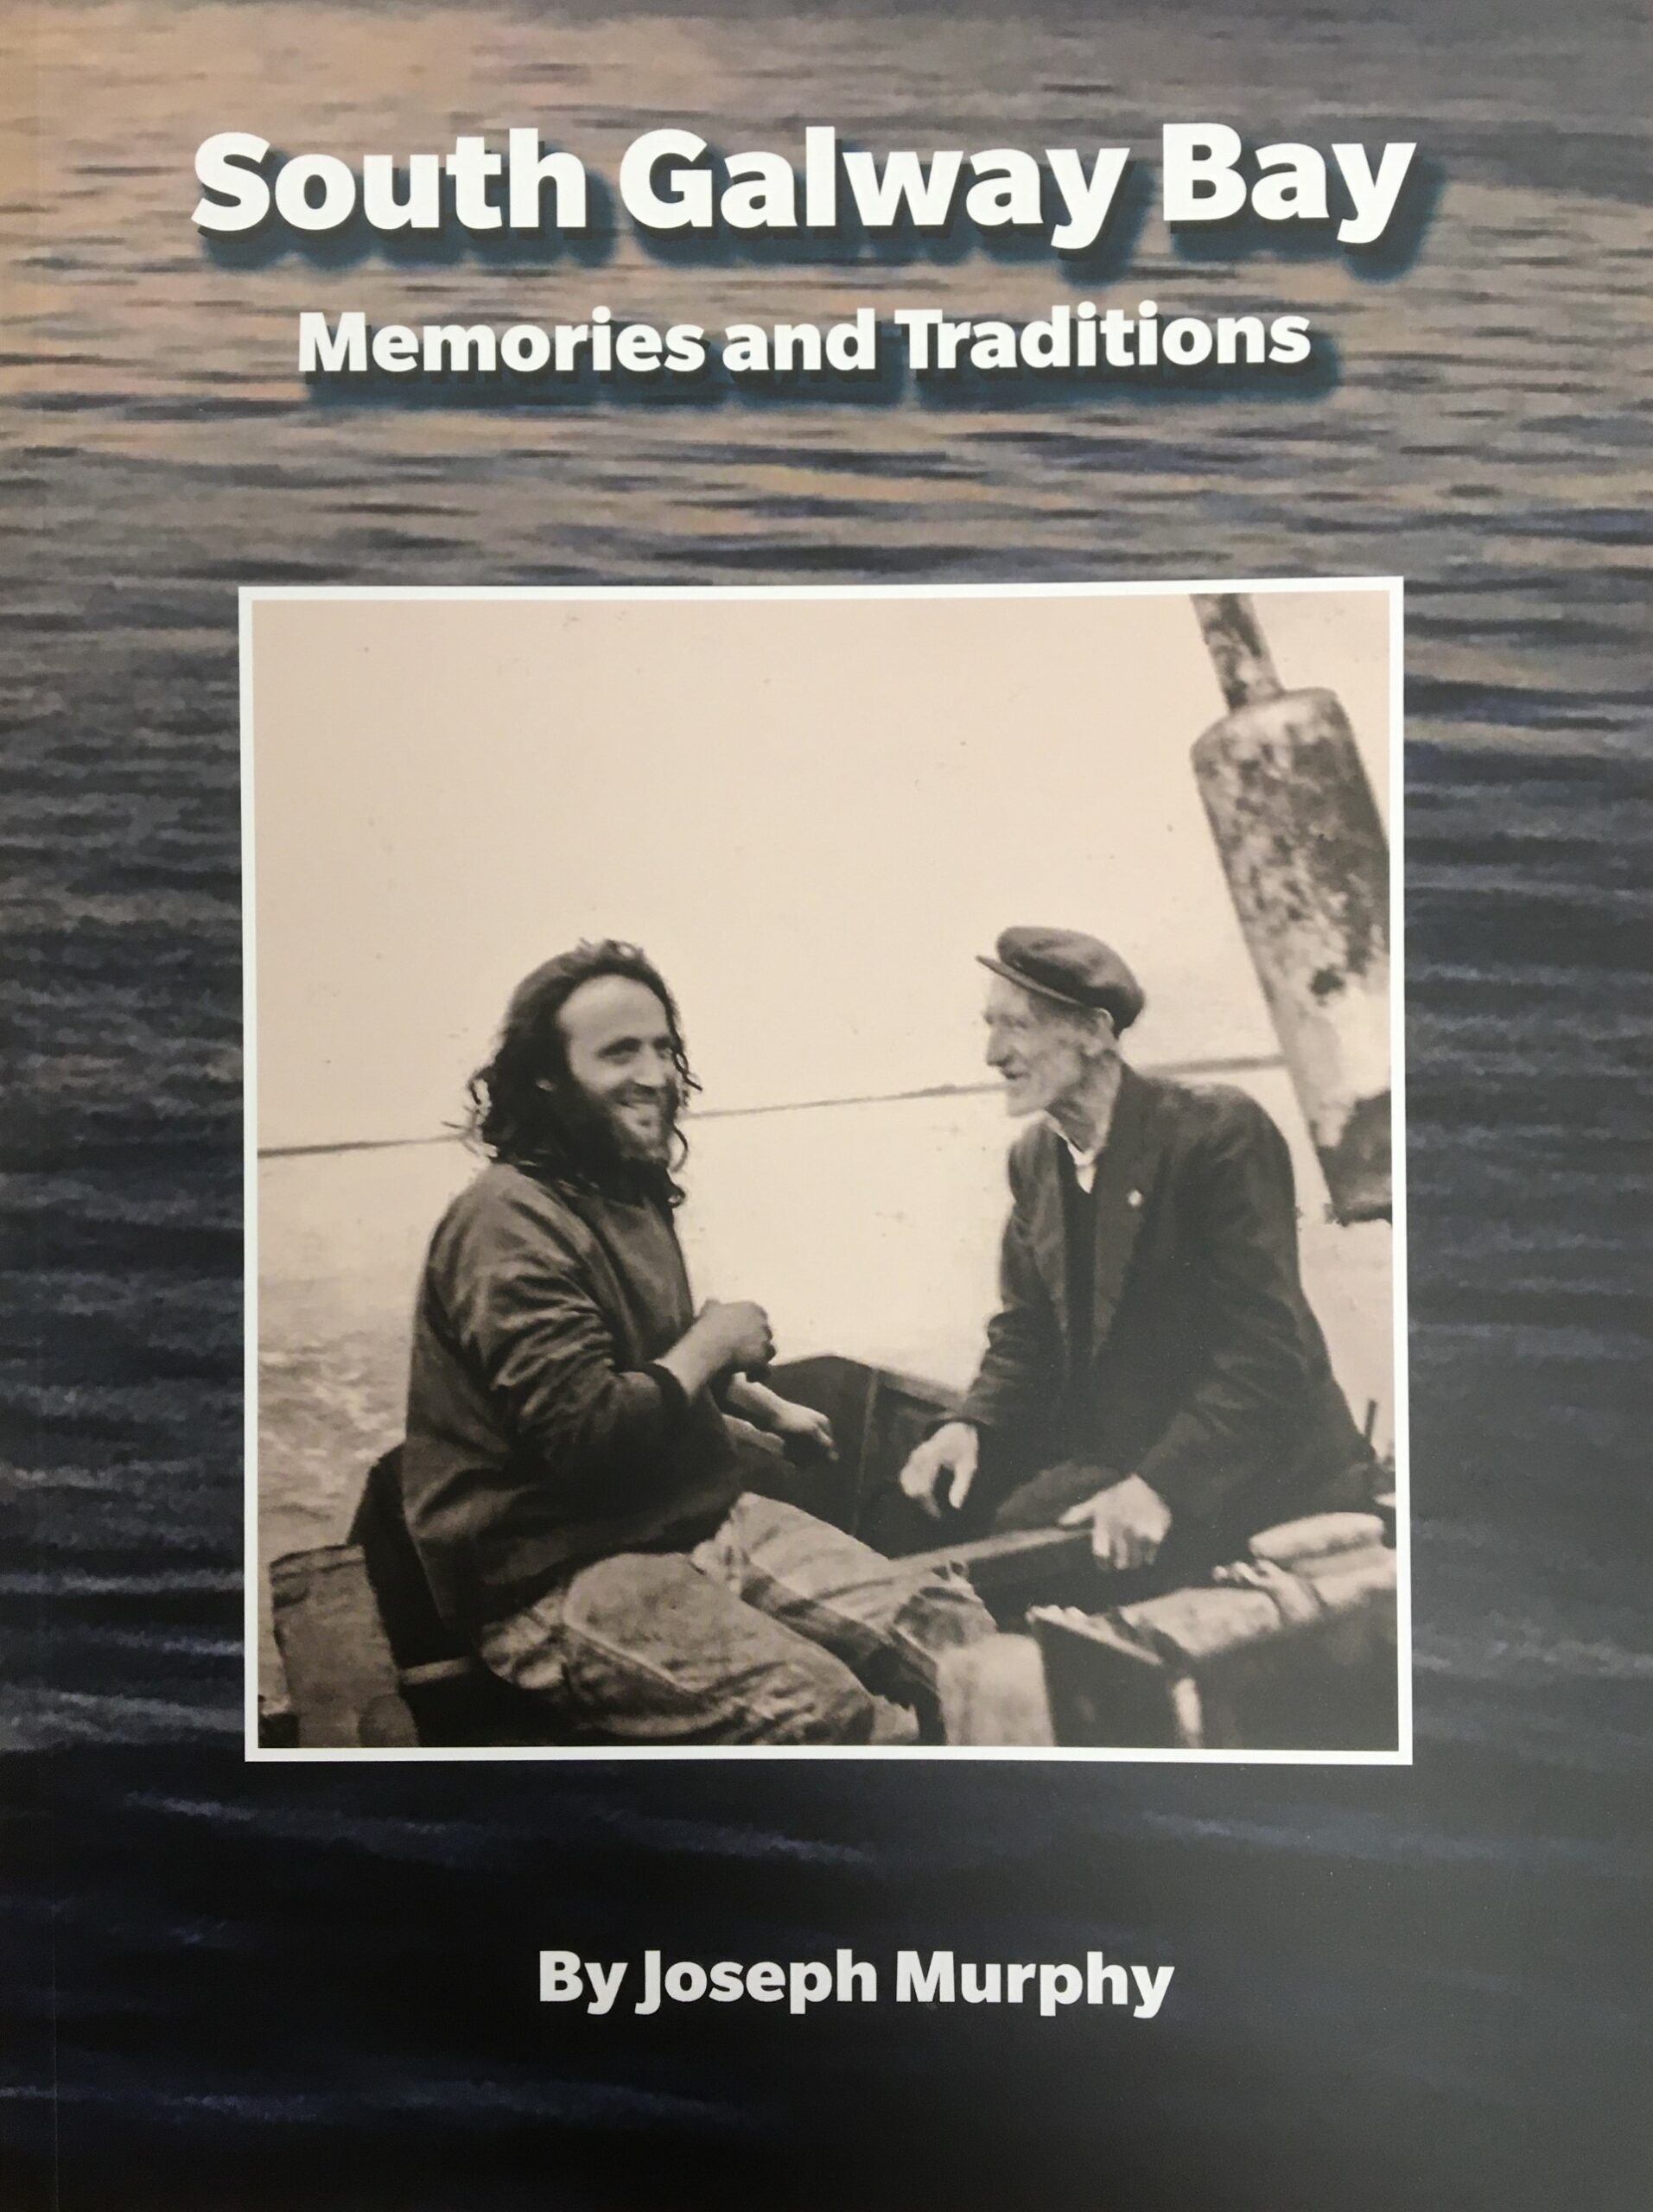 South Galway Bay : Memories and Traditions | Joseph Murphy | Charlie Byrne's